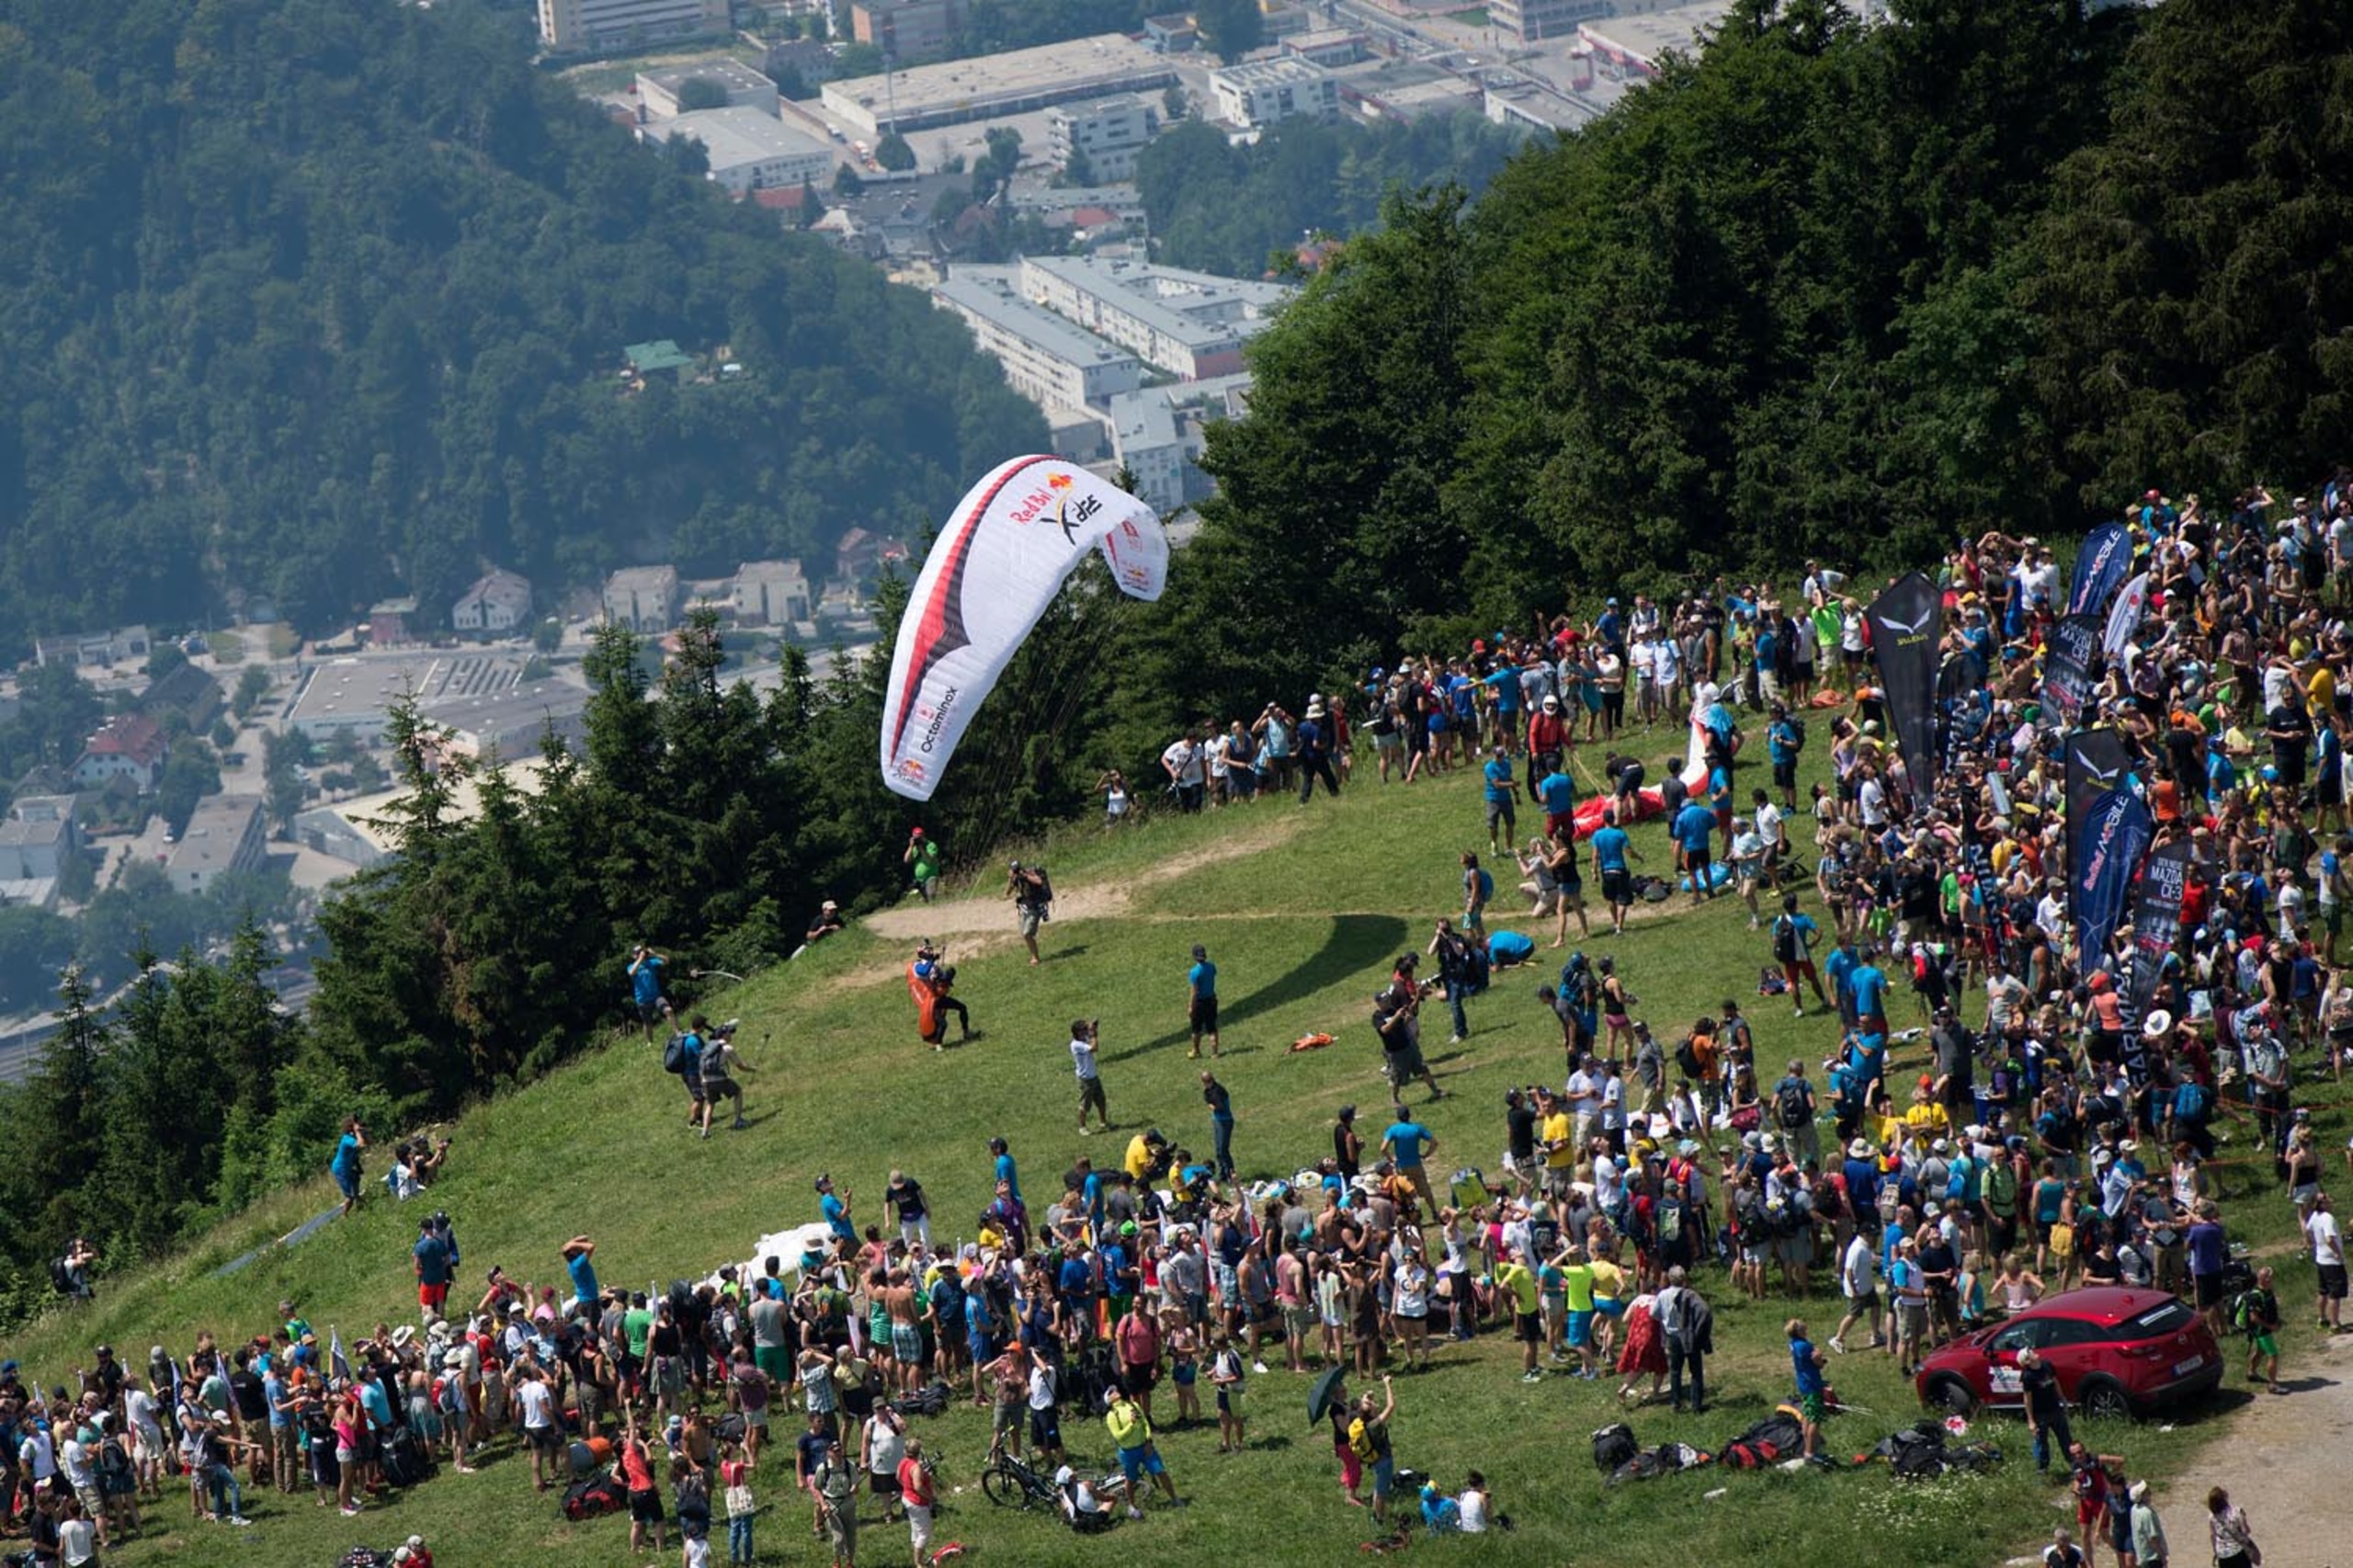 Competitors perform at the Gaisberg Mountain during the adventure race Red Bull X-Alps in Salzburg, on July 5th,  2015.